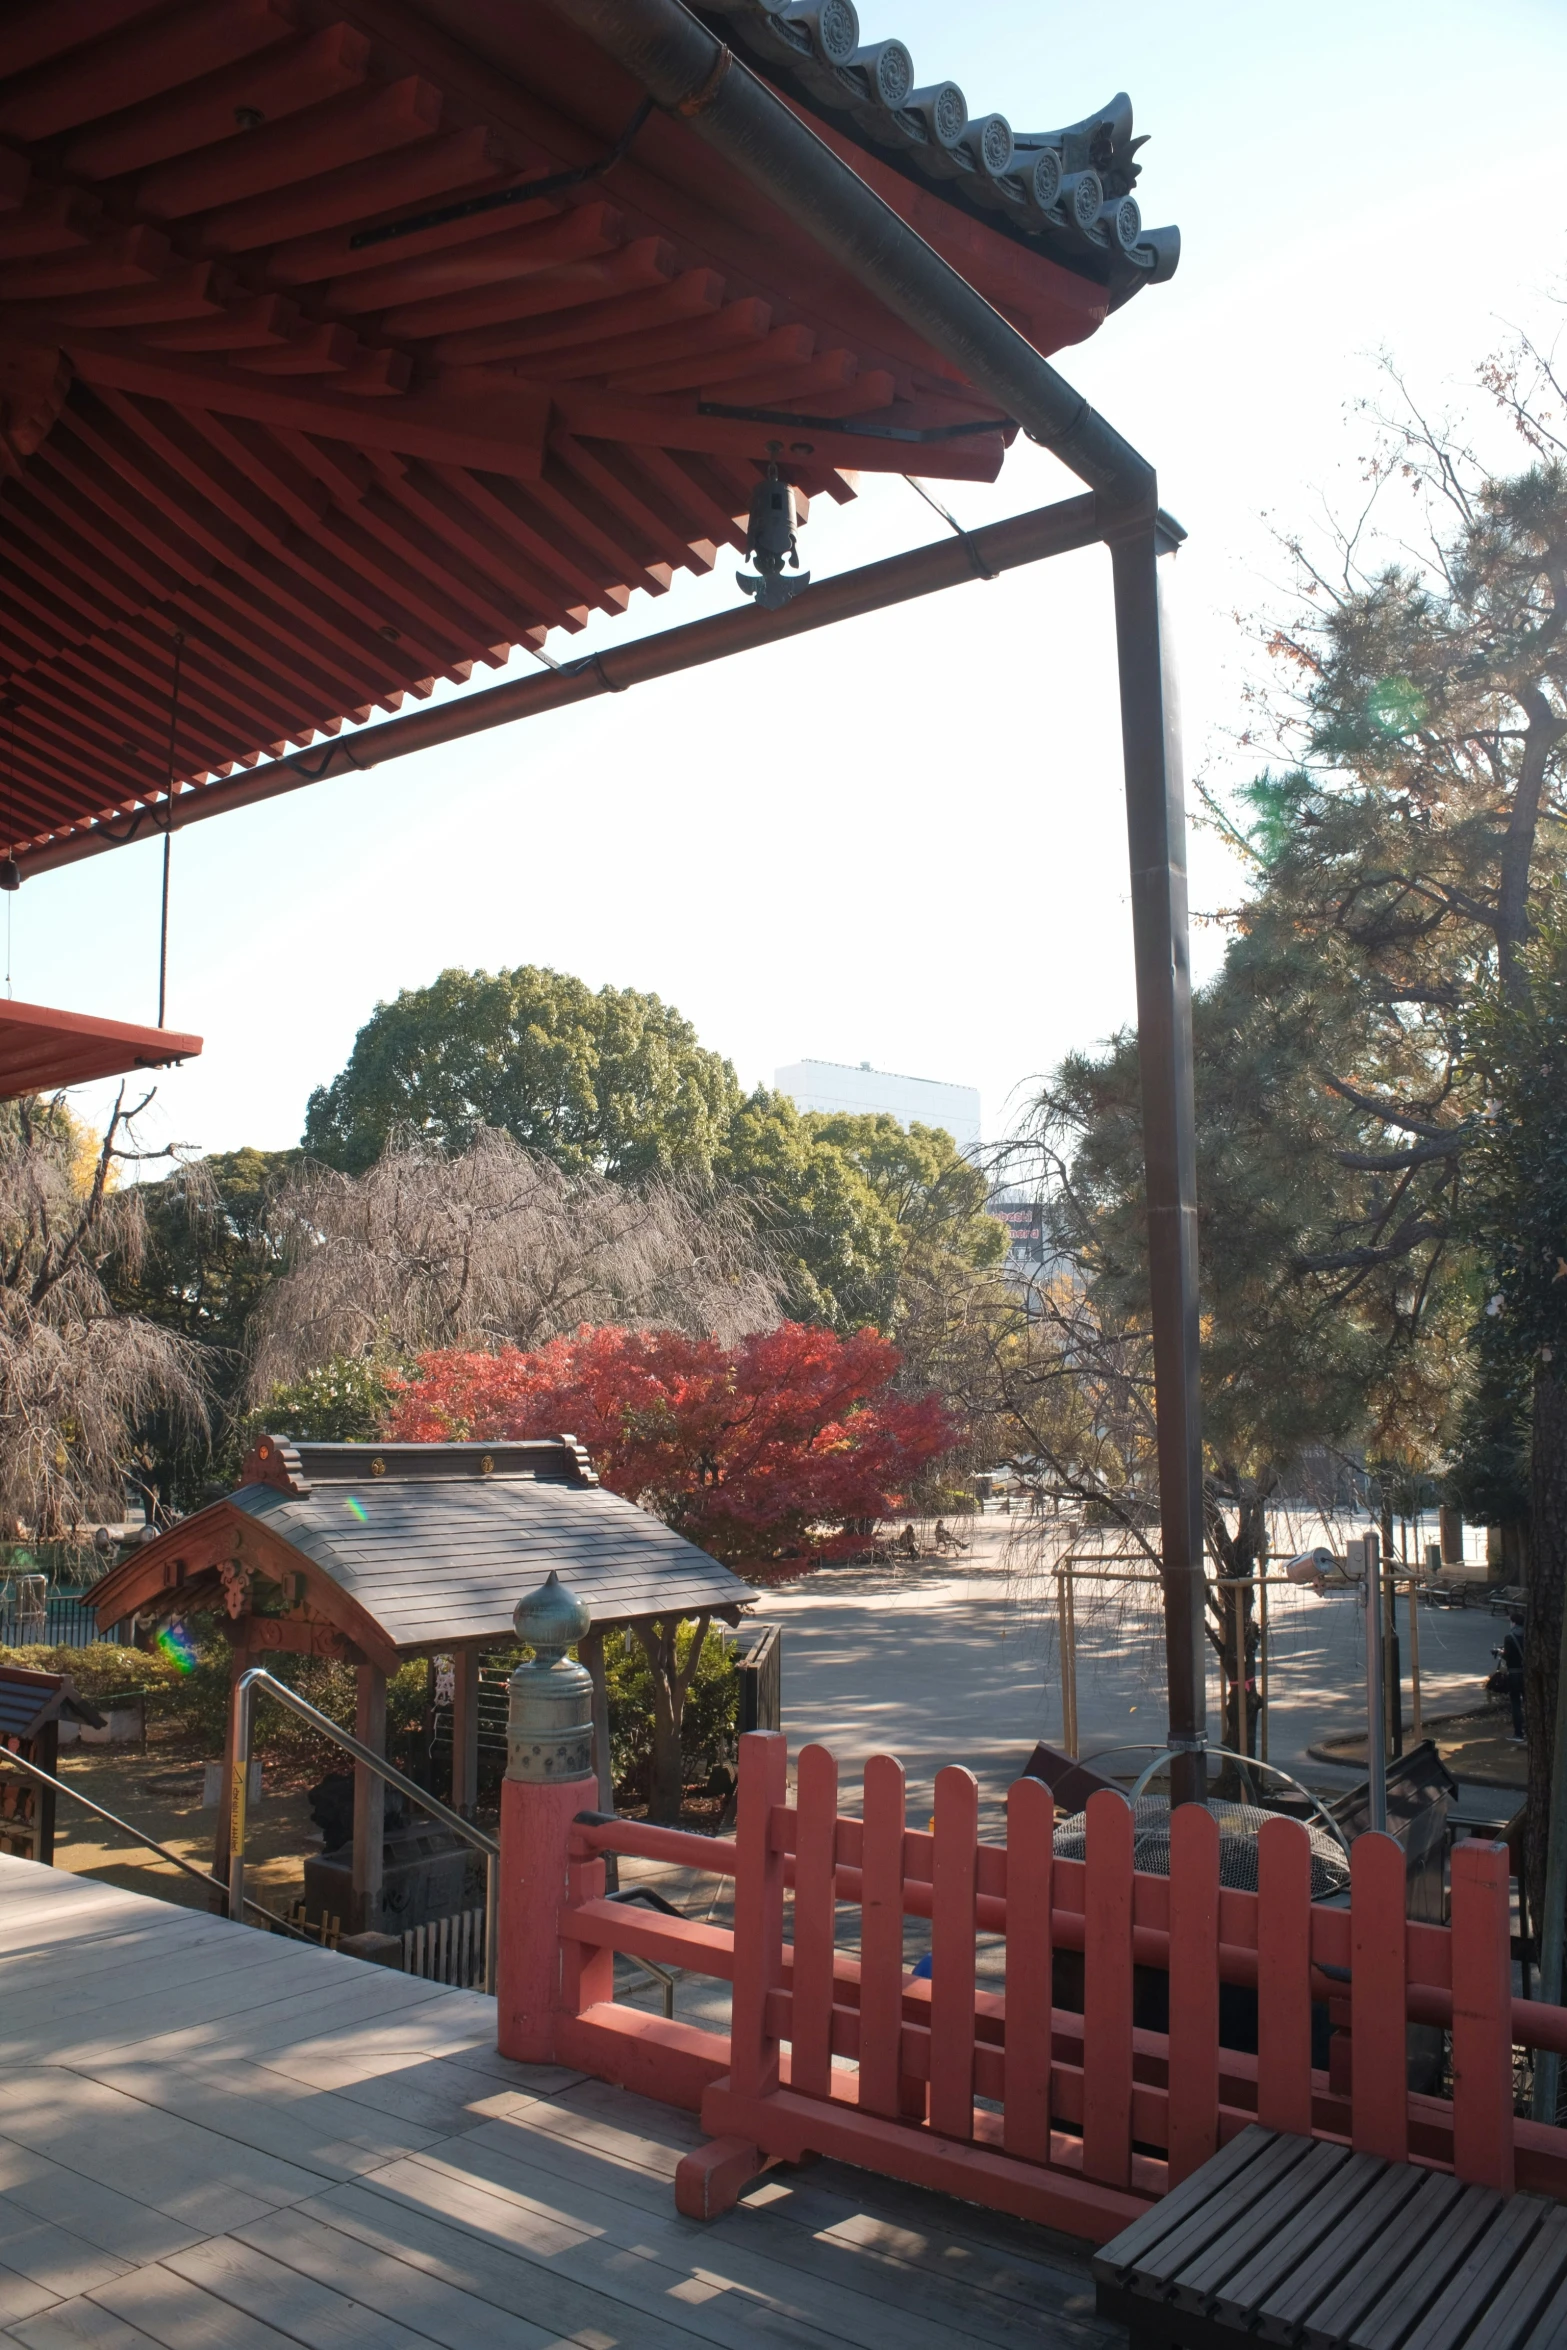 this is an outdoor seating area in a japanese park